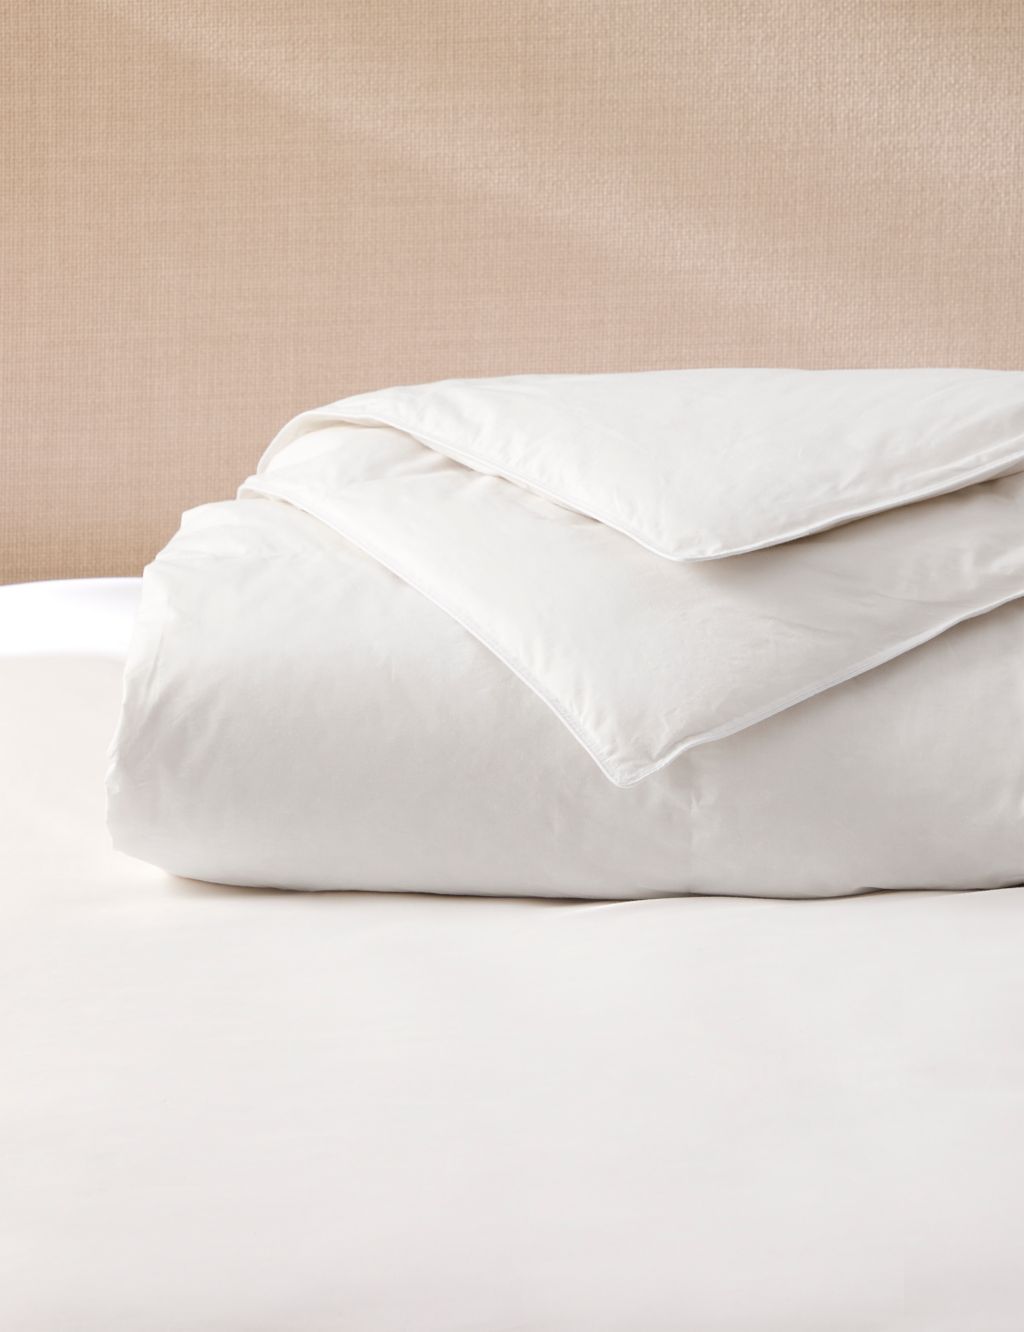 Duck Feather & Down 7.5 Tog Duvet image 1